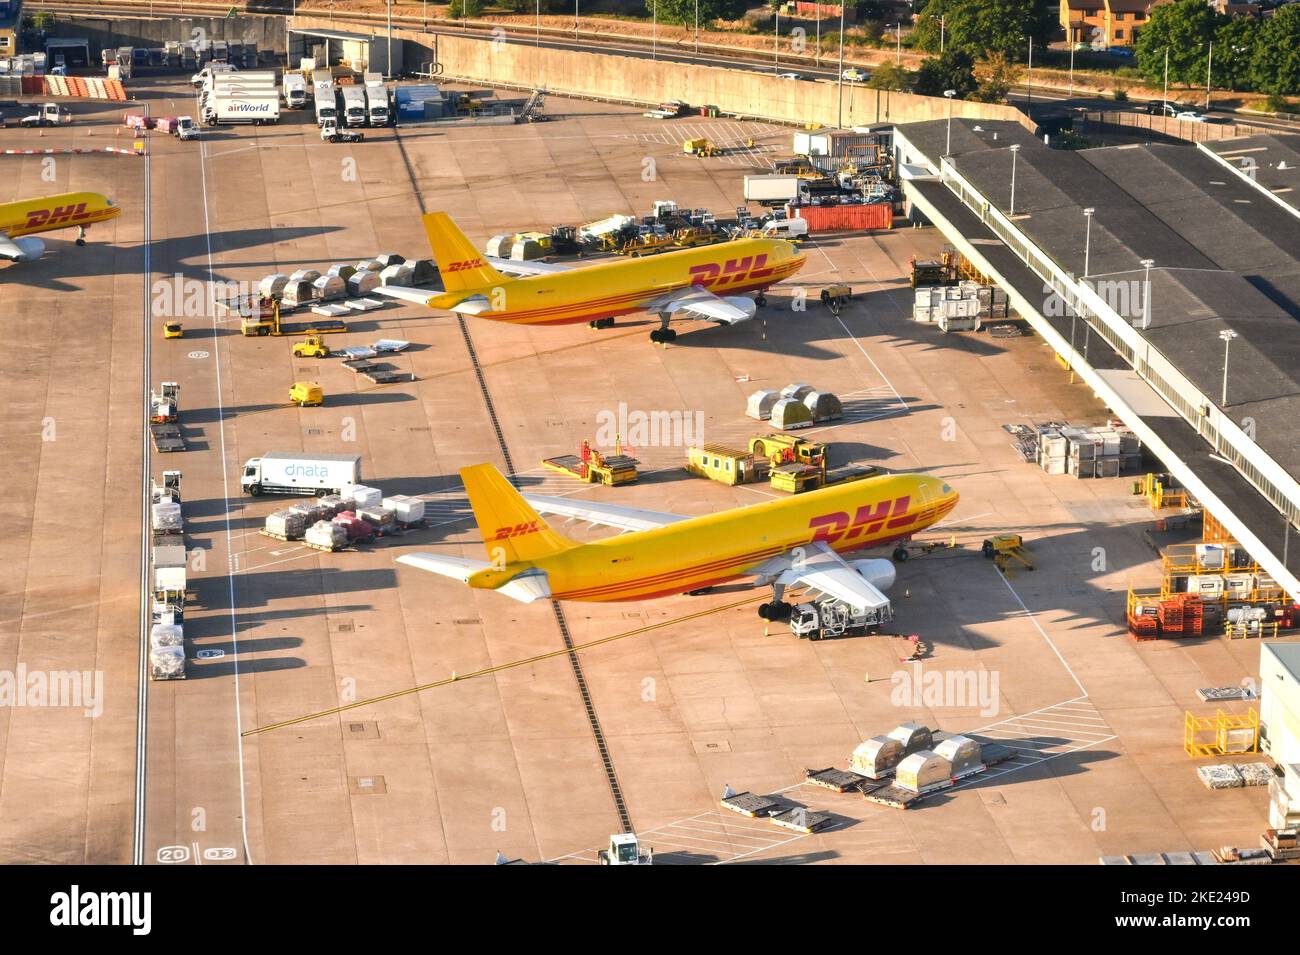 London, England - August 2022: Aerial view of cargo planes operated by DHL parked for unloading at the cargo terminal of an airport. Stock Photo